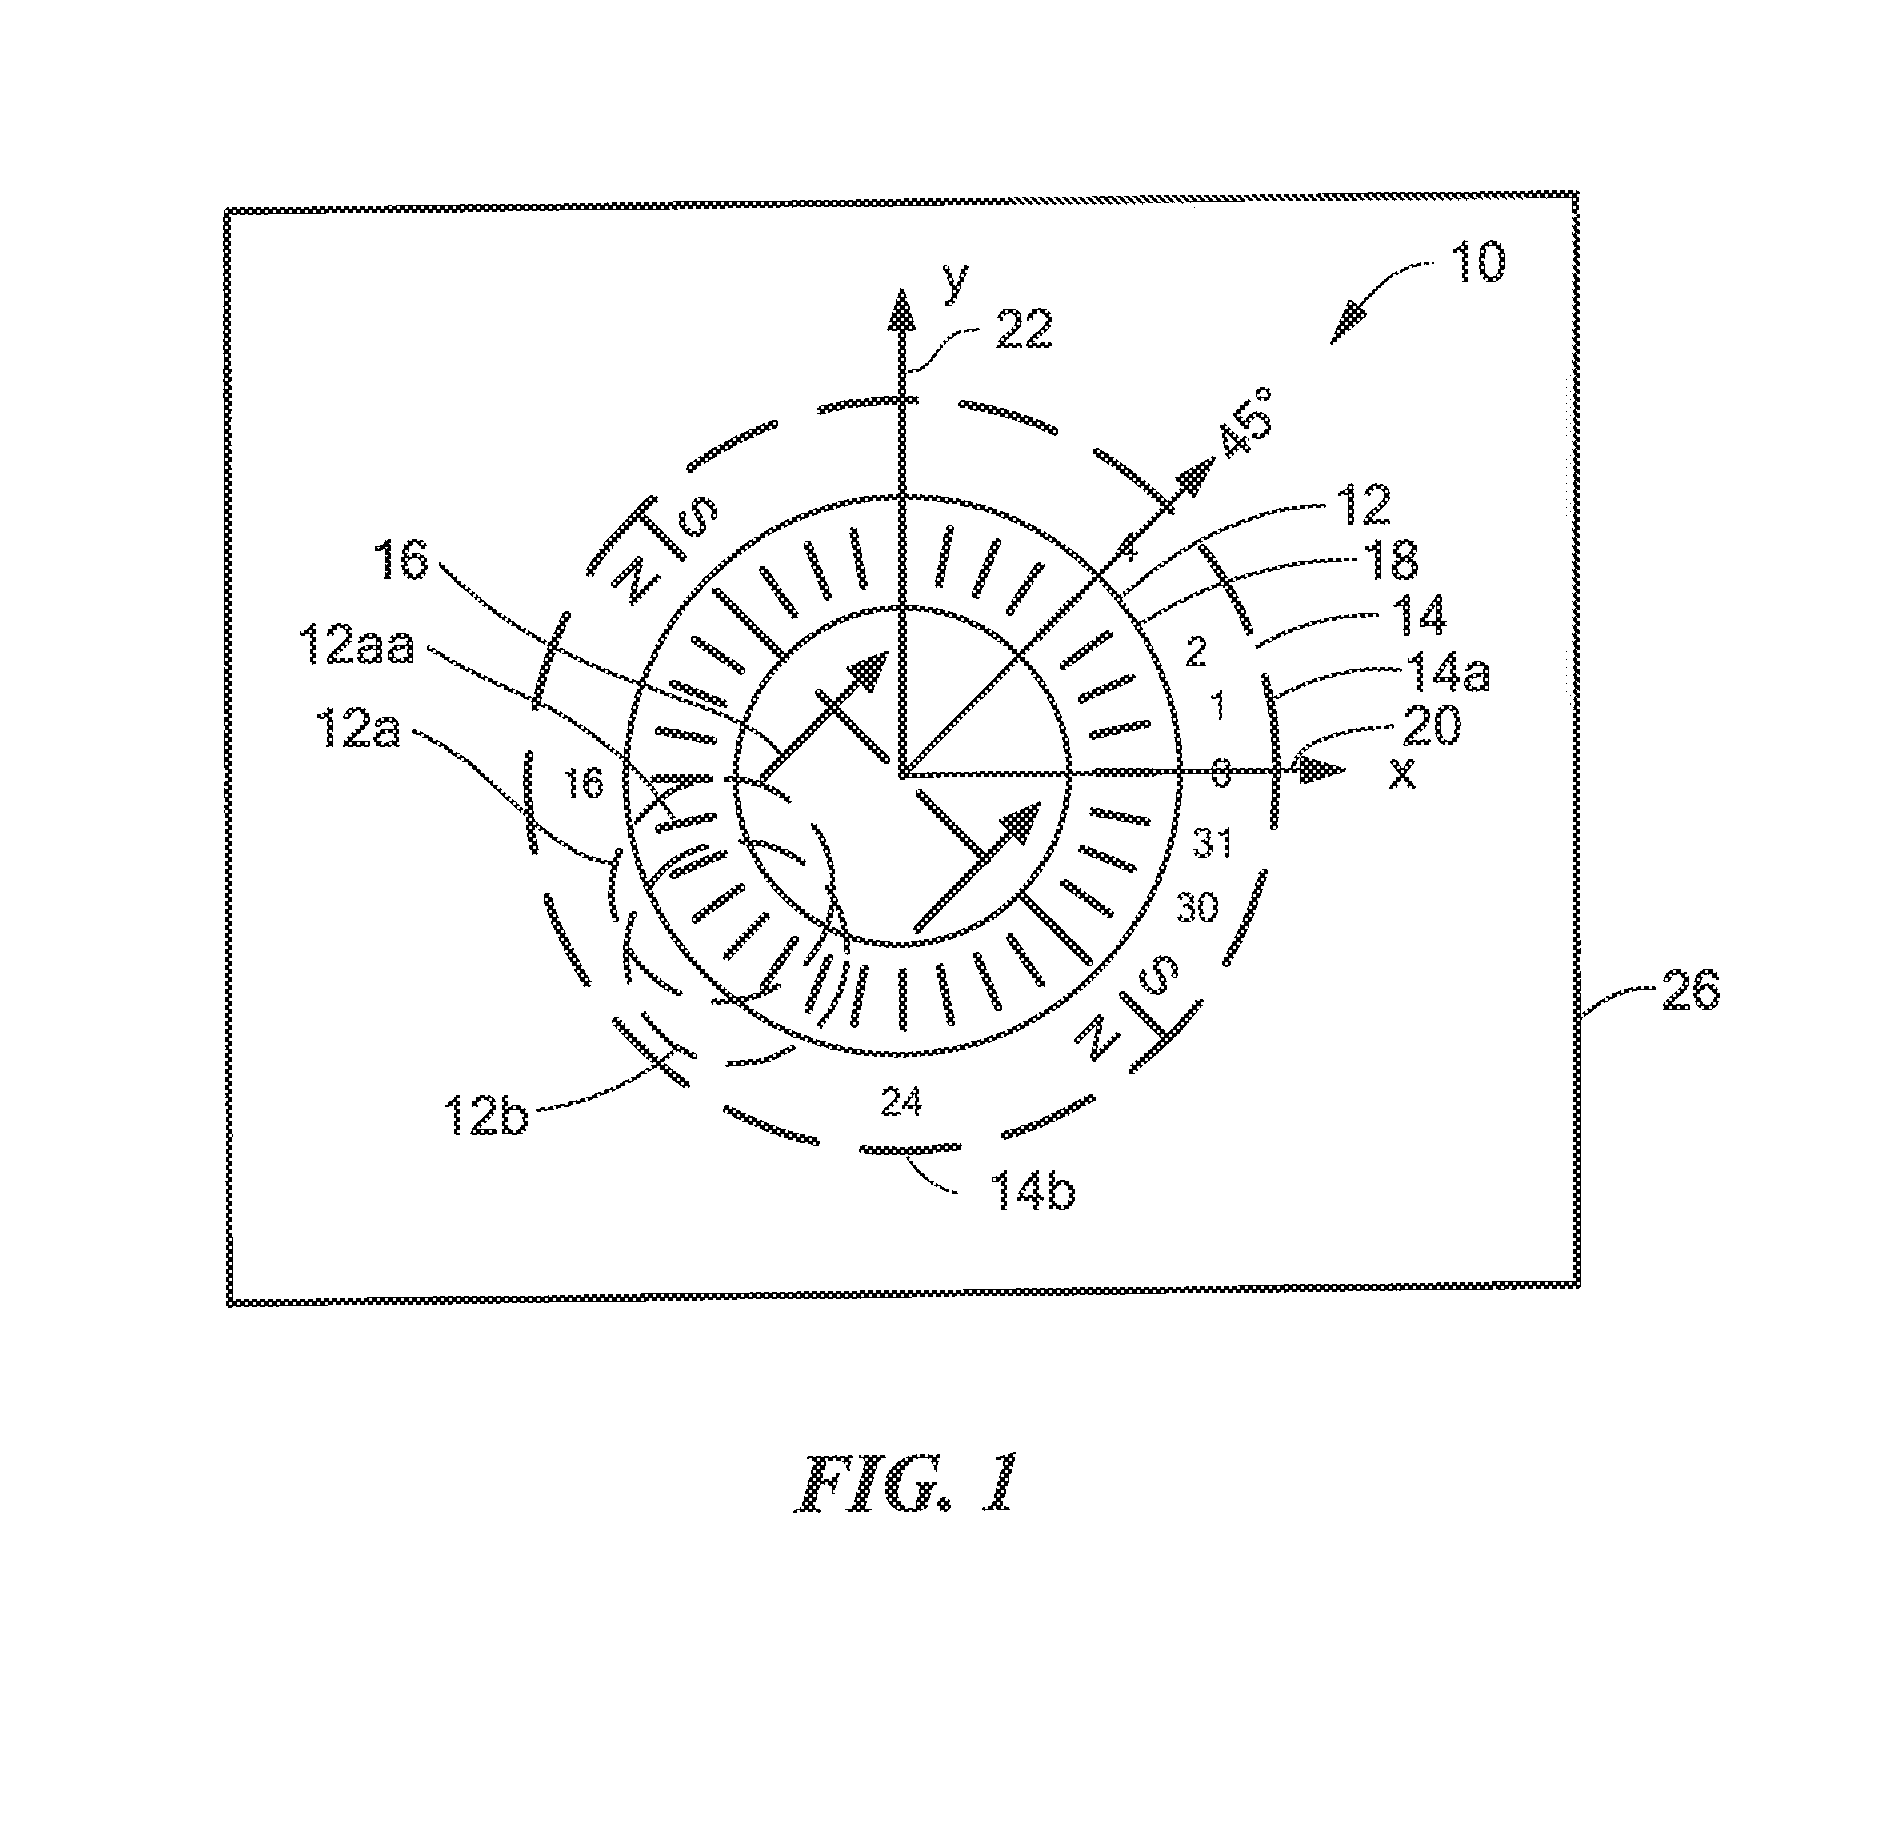 Magnetic field sensor and method of fabricating a magnetic field sensor having a plurality of vertical hall elements arranged in at least a portion of a polygonal shape